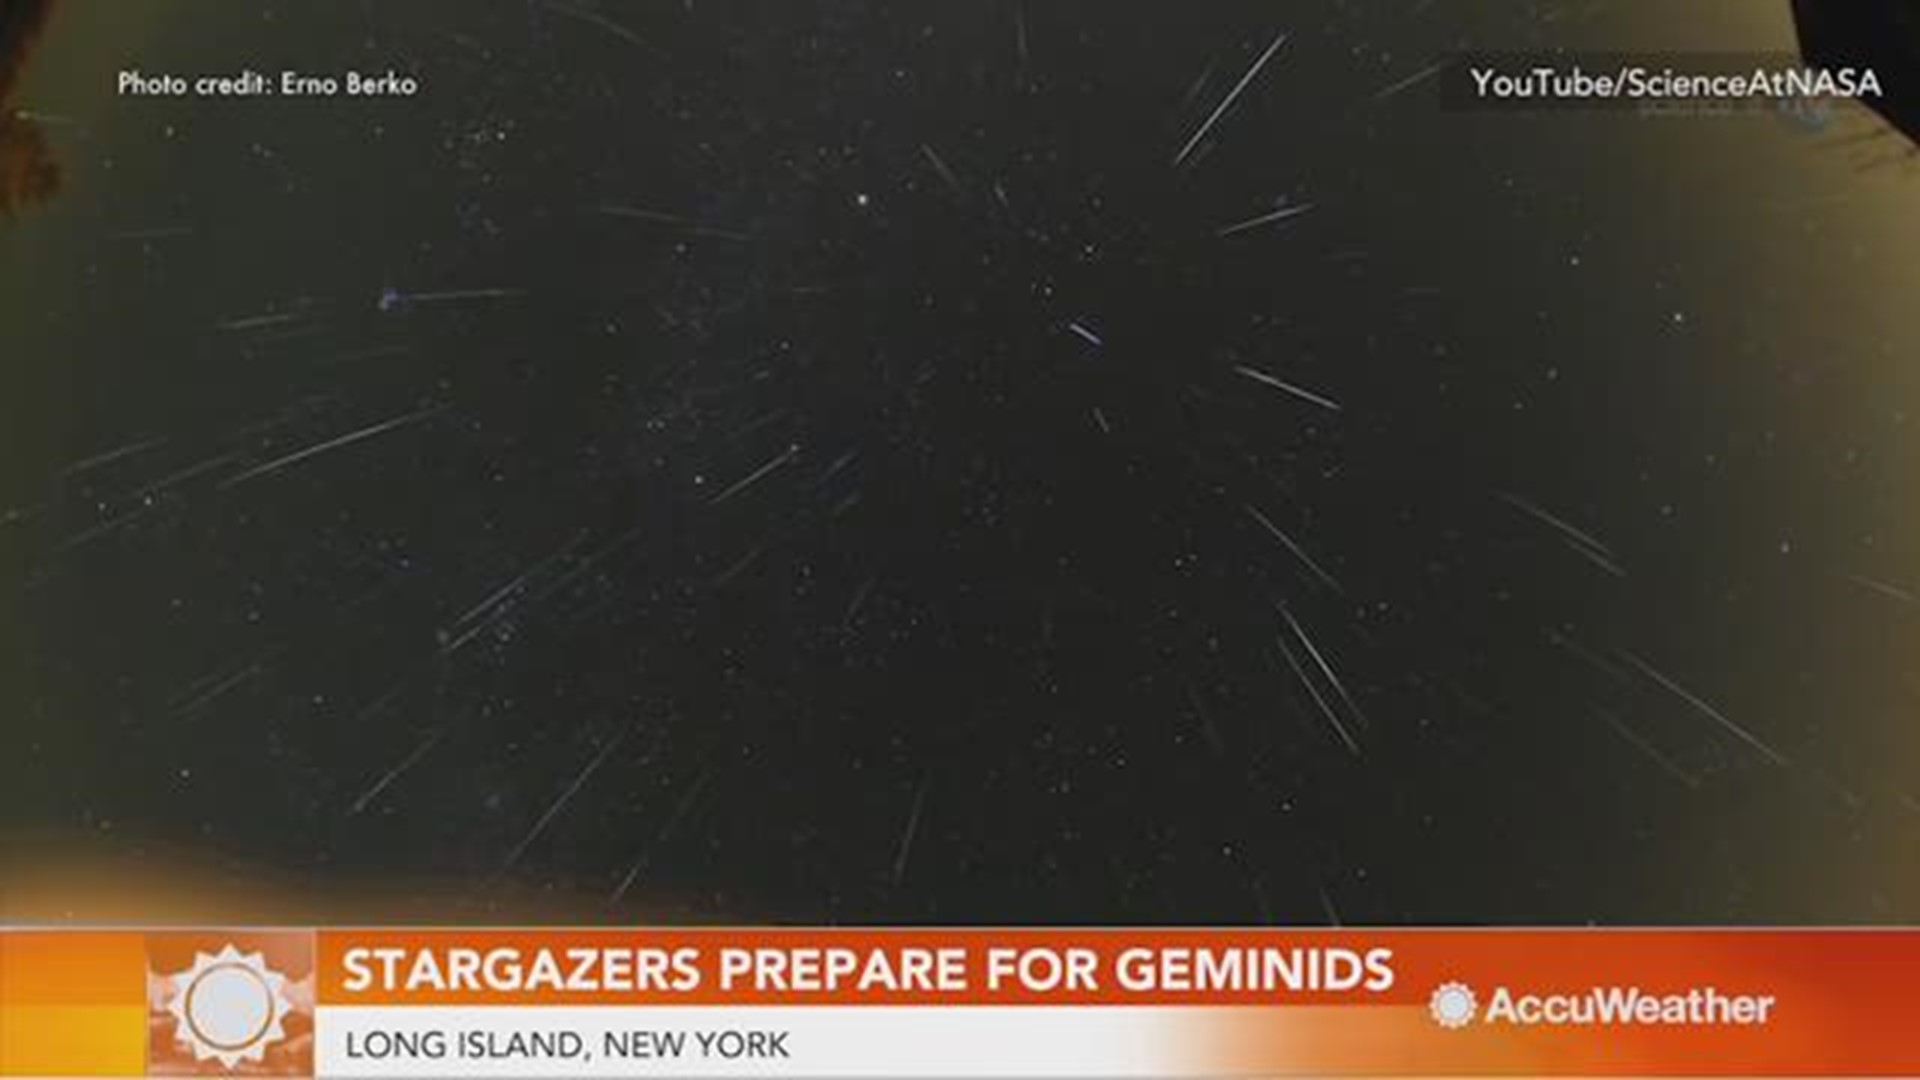 AccuWeather reporter Kena Vernon is in Long Island, New York where stargazers eagerly wait for nighttime when Geminid meteors will streak across the sky during its peak.